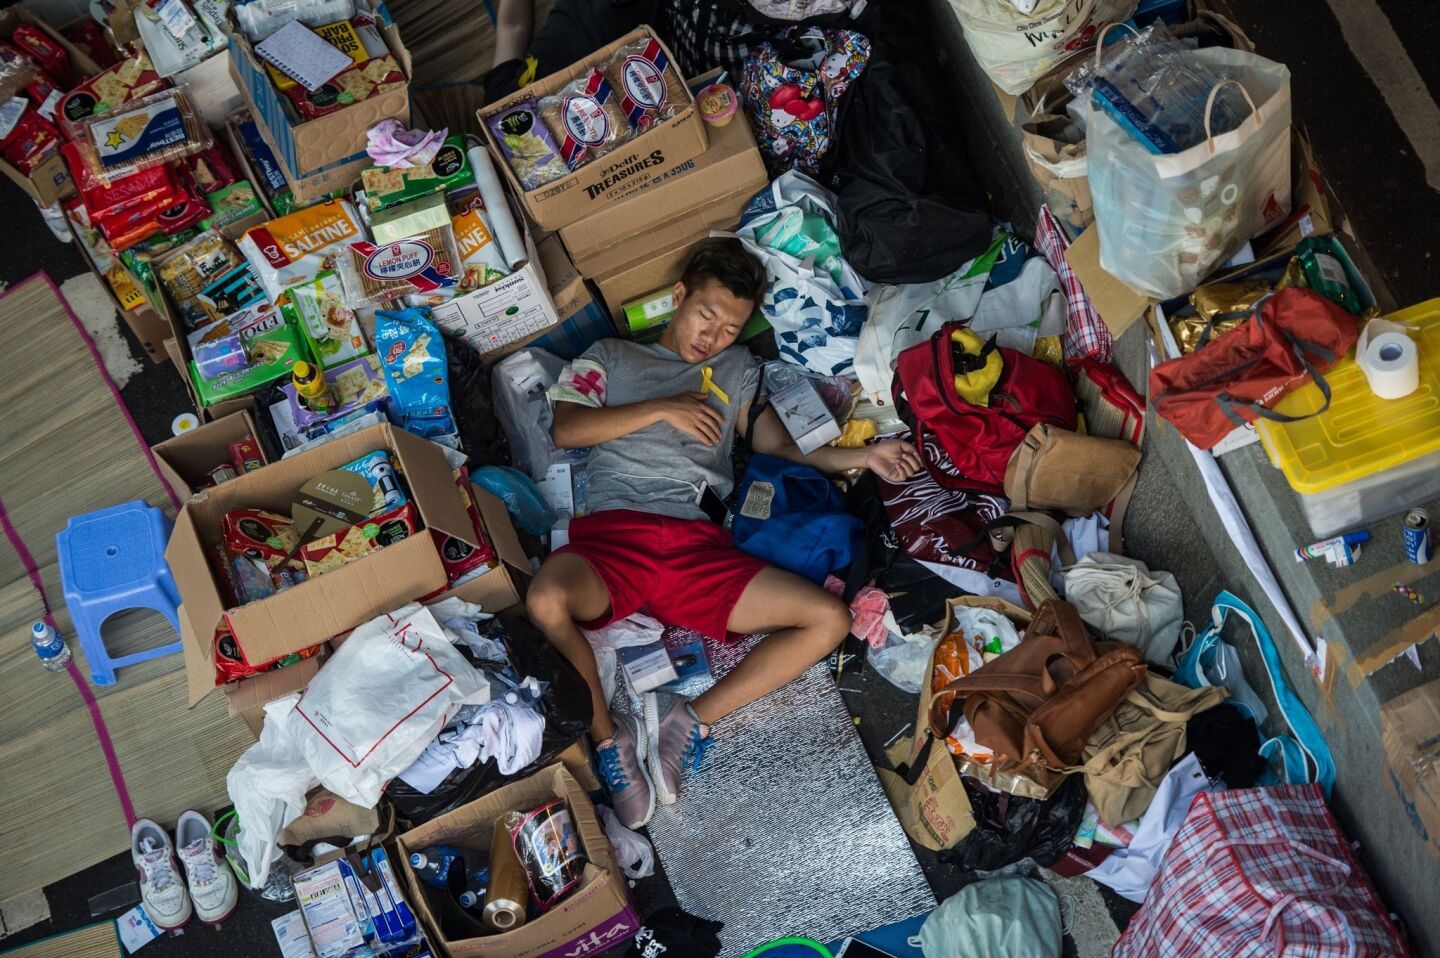 A protester working as a medical volunteer sleeps in a makeshift supplies area on an overpass in Hong Kong.